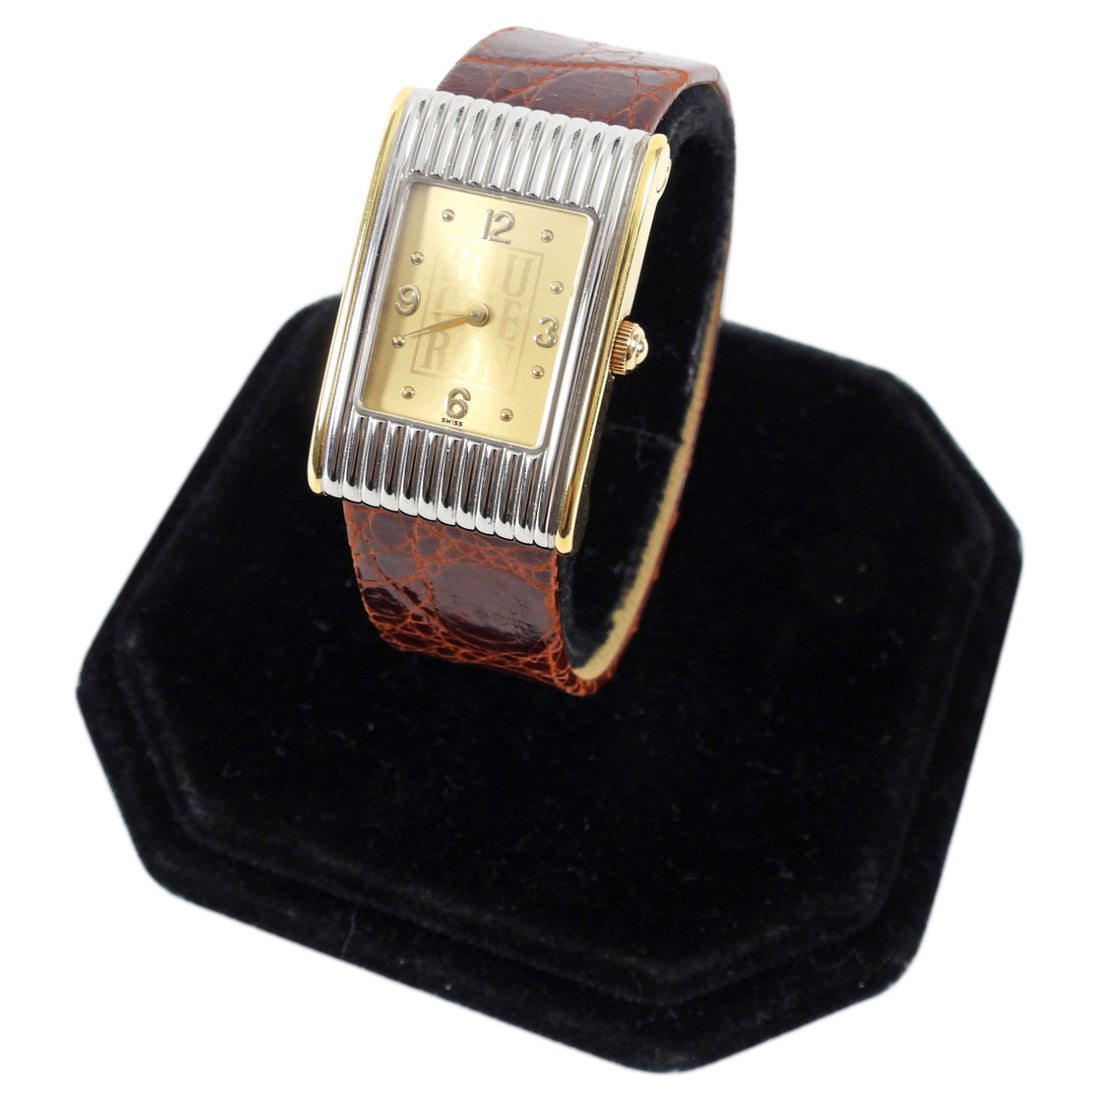 Boucheron Reflet Vintage Watch with Interchangeable Bands